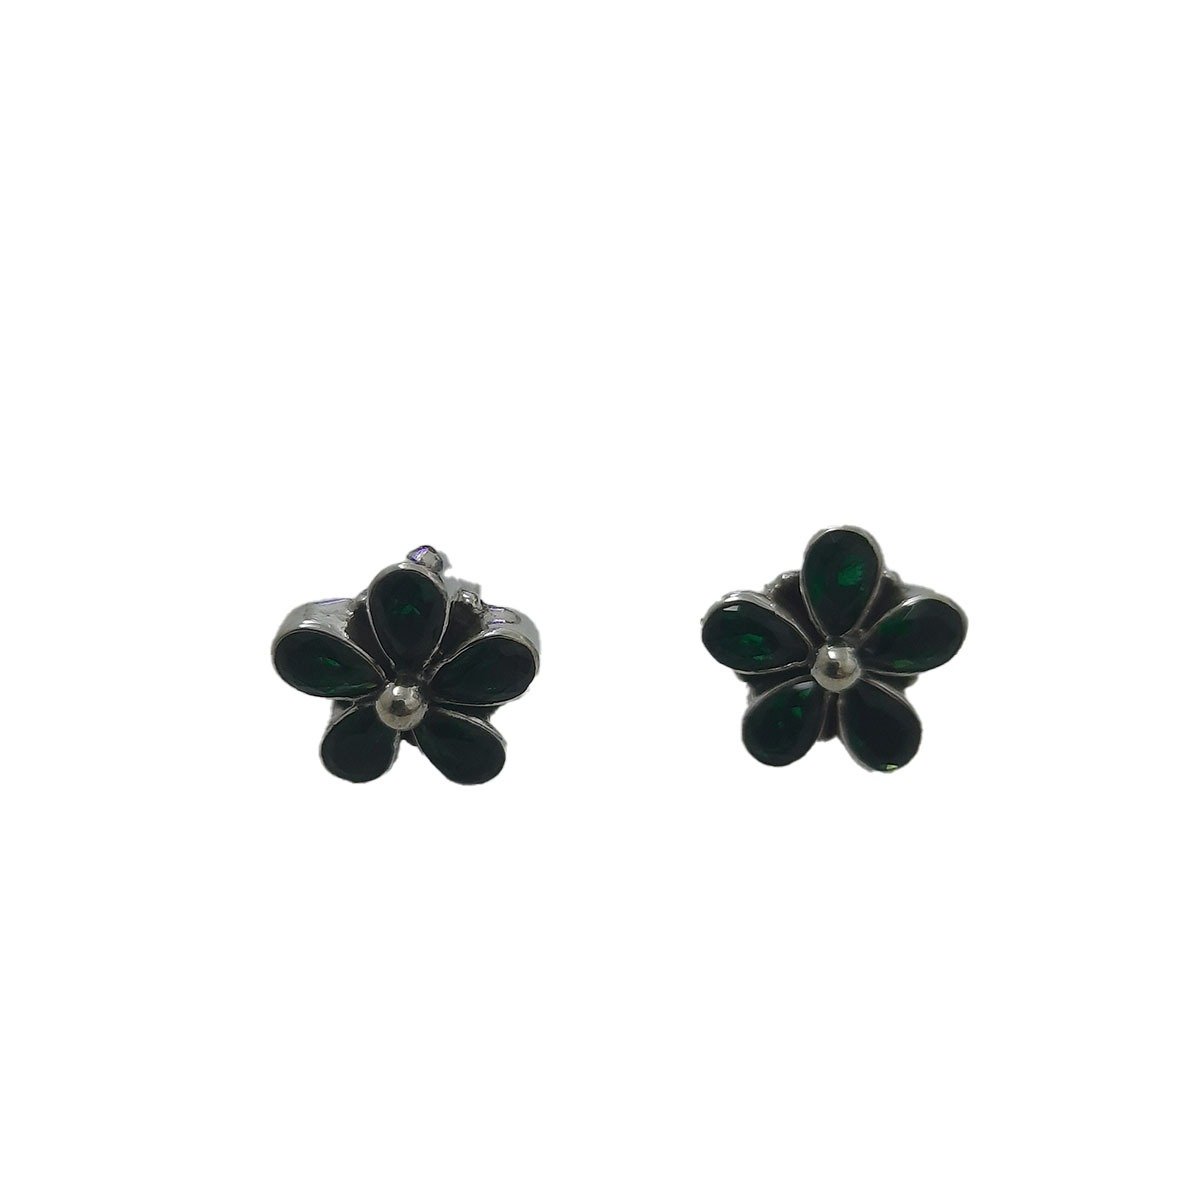 GREEN STONE FLORAL EARRING IN SILVER